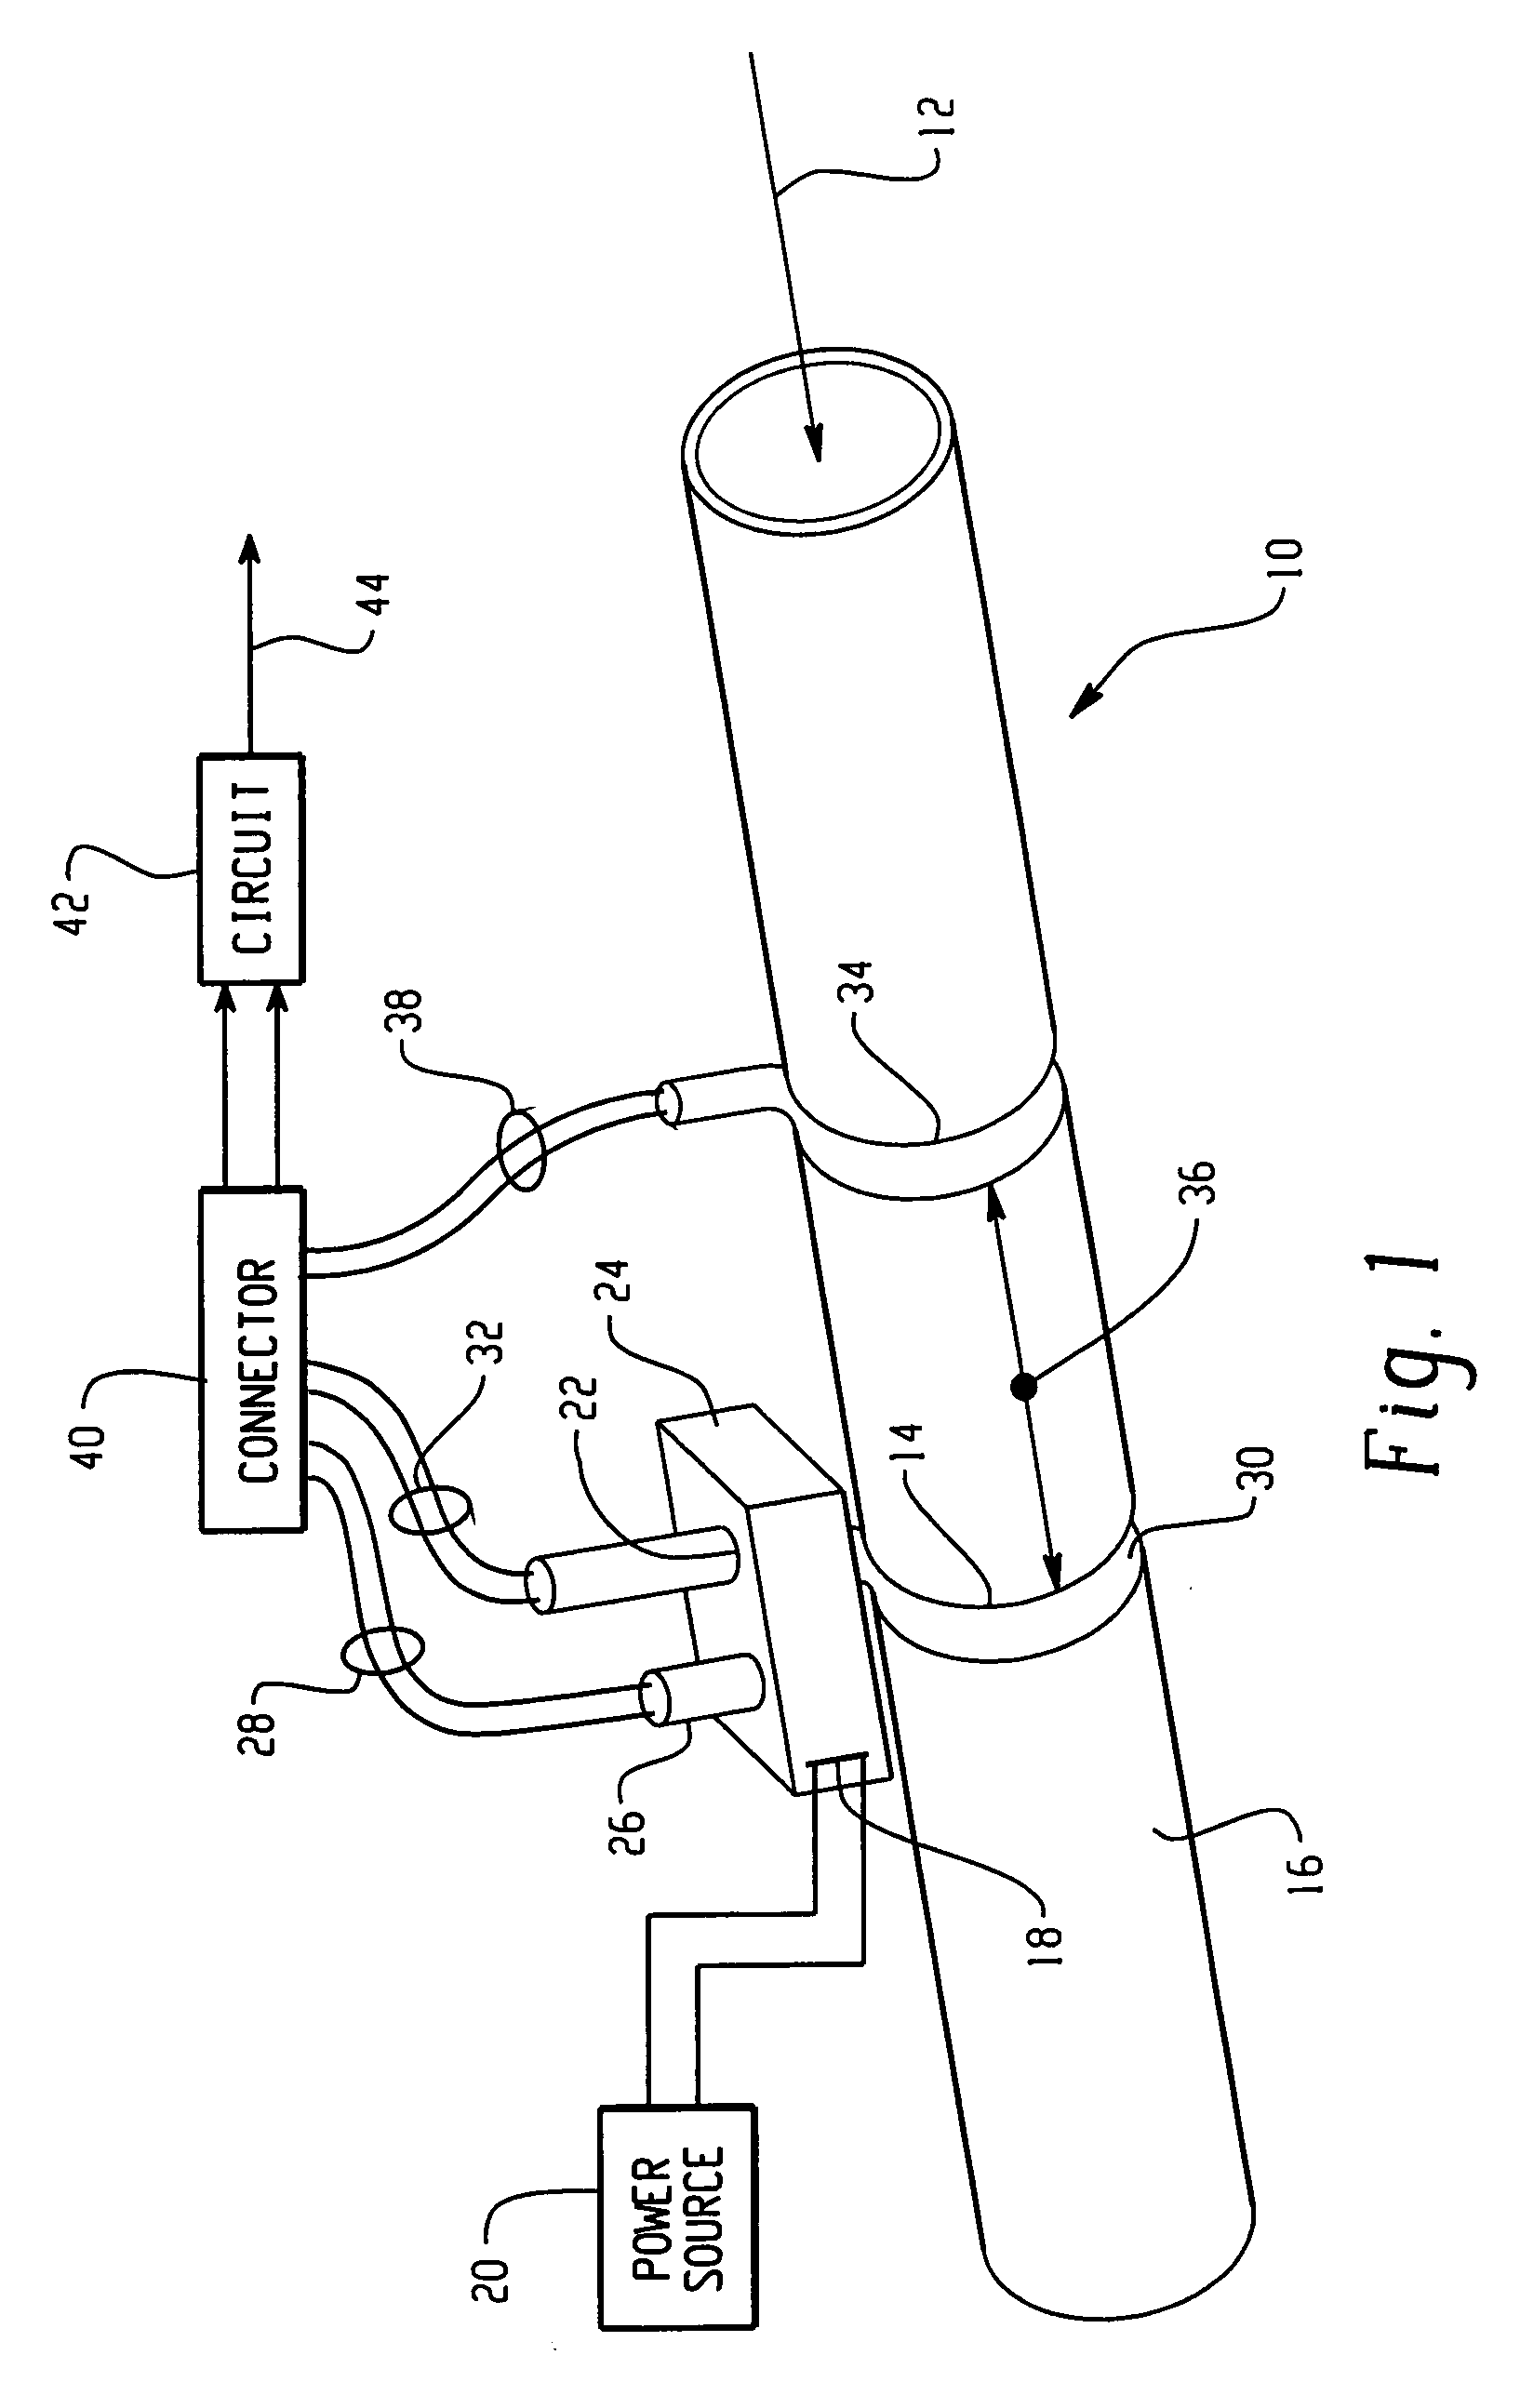 Sensor and method of measuring mass flow non-intrusively